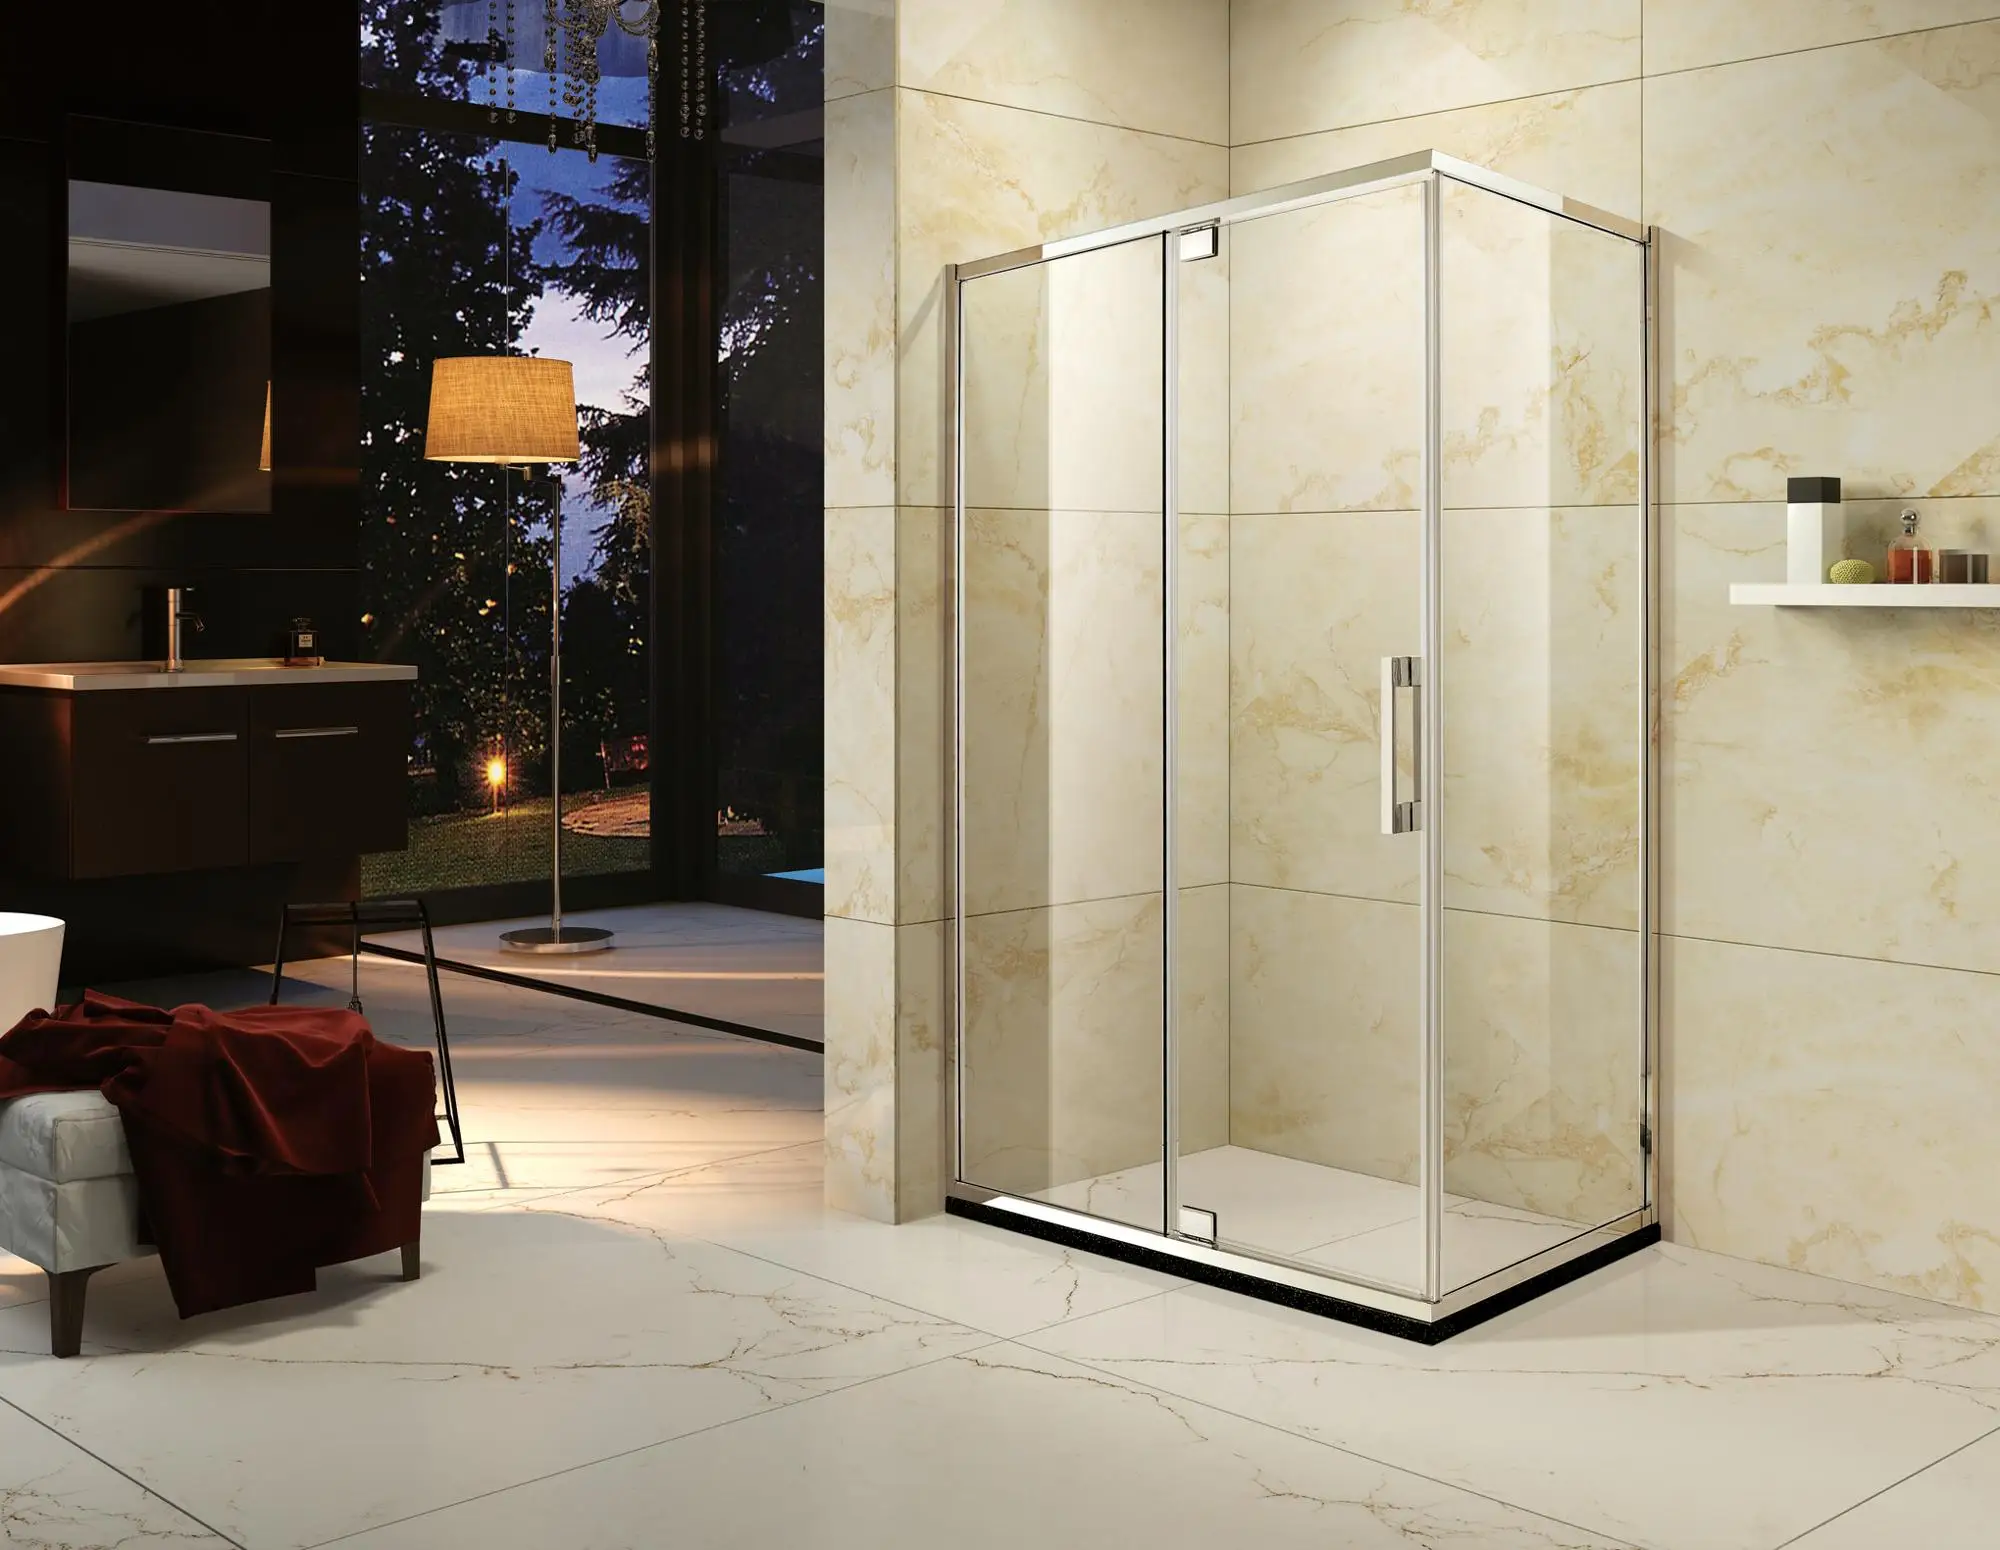 stainless steel frame stainless steel hinge pivot door two fix and one open rectangle shape shower enclosure